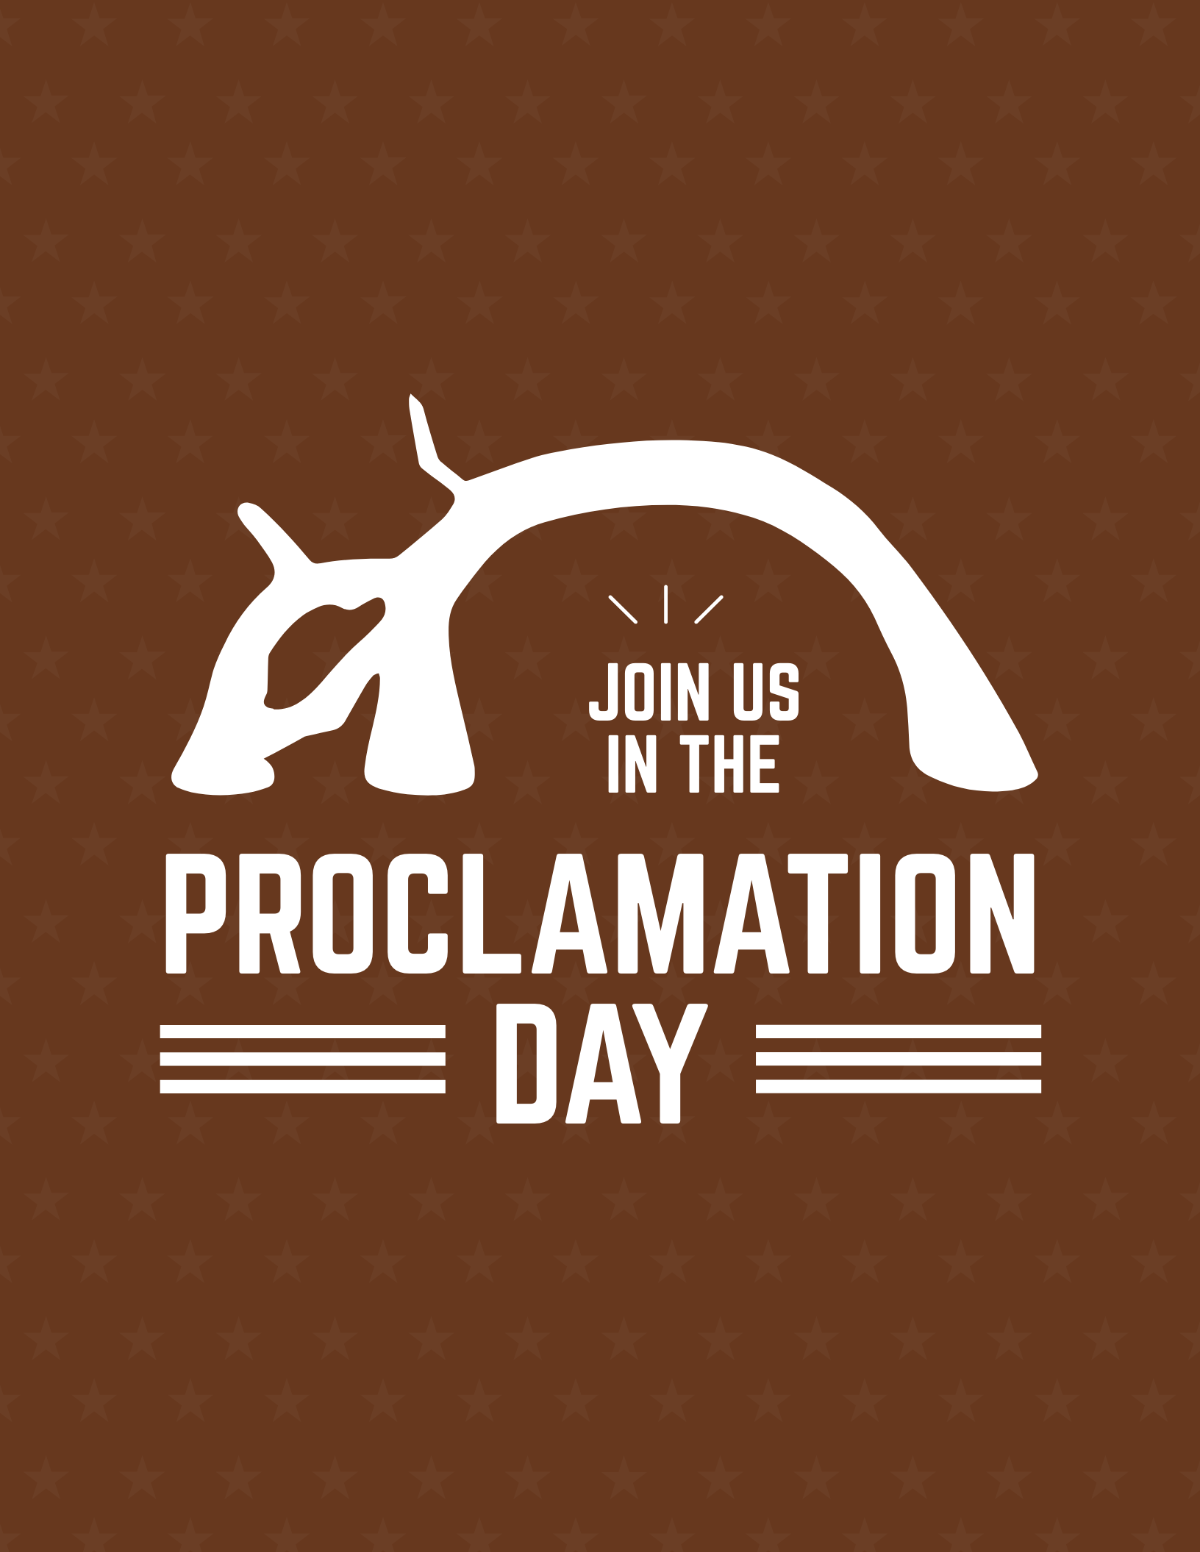 Proclamation Day Flyer